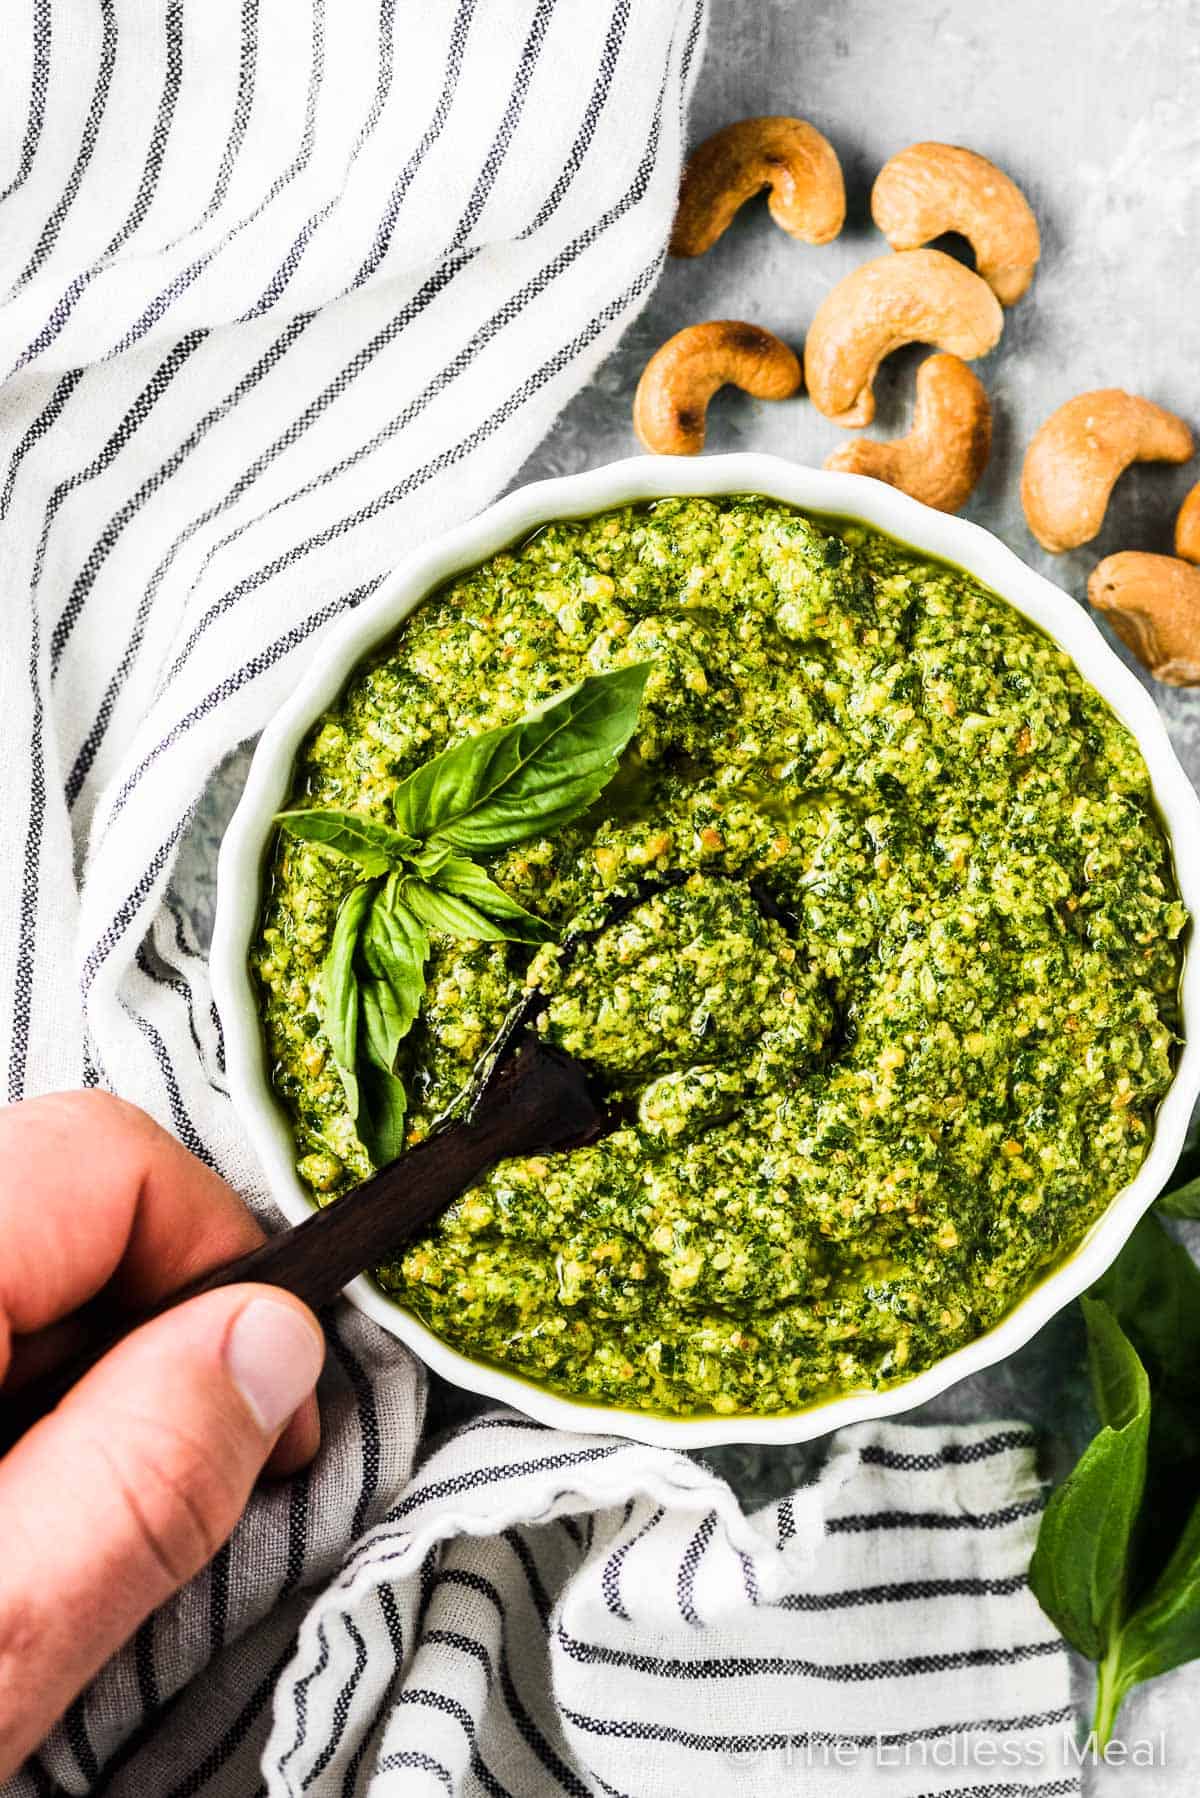 A hand holding a spoon taking a scoop of dairy free pesto out of a white bowl.